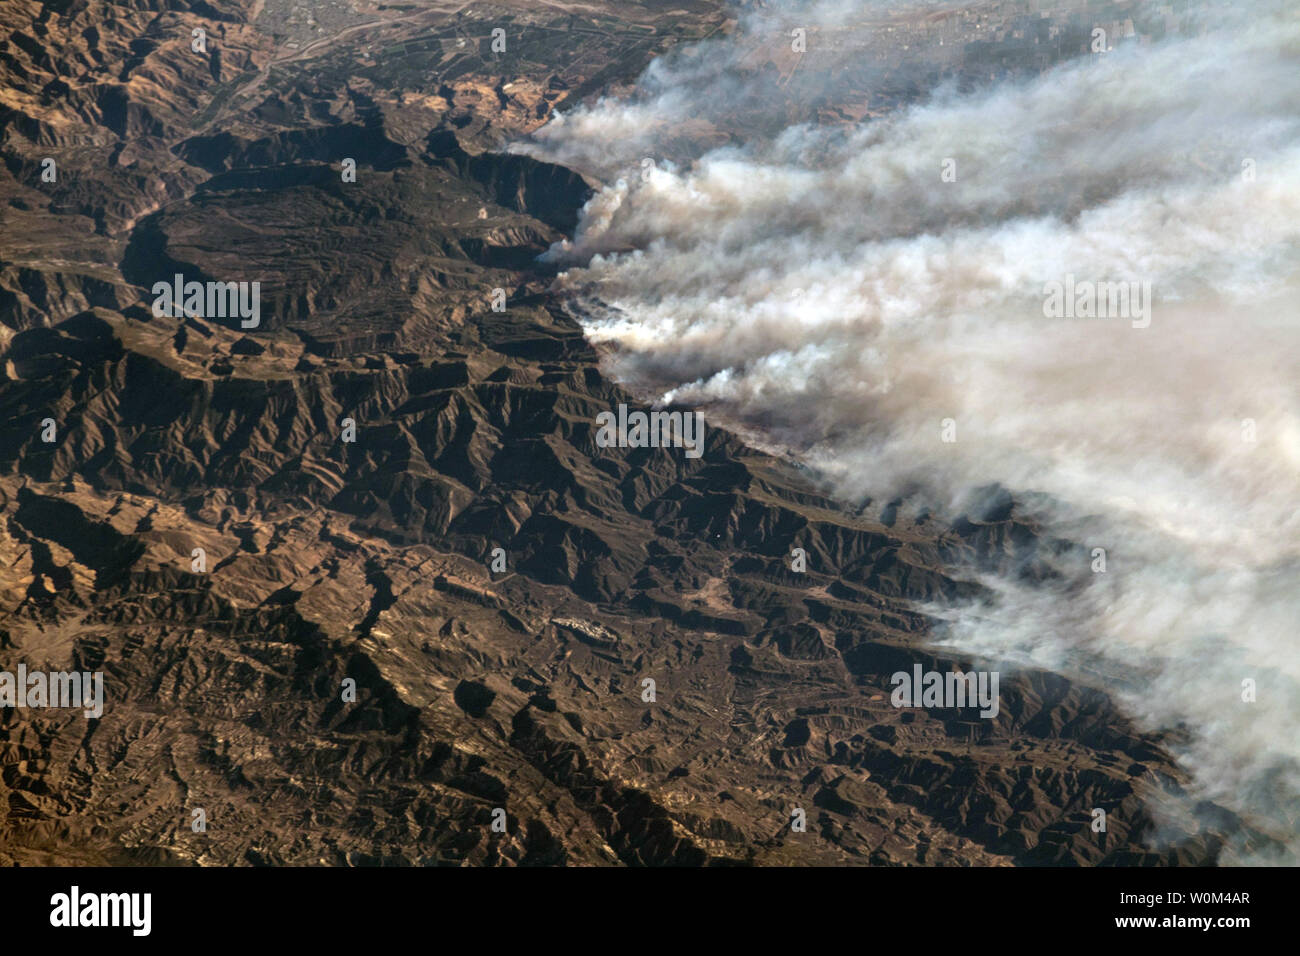 Expedition 53 Commander Randy Bresnik aboard the International Space Station took this photo of the California wildfires in the Los Angeles on December 6, 2017. This raging inferno that has been described by firefighters as a 'war zone' started just four days ago on December 4. Burning more than 96,000 acres and 150 structures to date according to Inciweb this fire has been urged on by one particular meteorological phenomenon in California, the Santa Ana (also known as the Diablo or Devil) winds. NASA/UPI Stock Photo